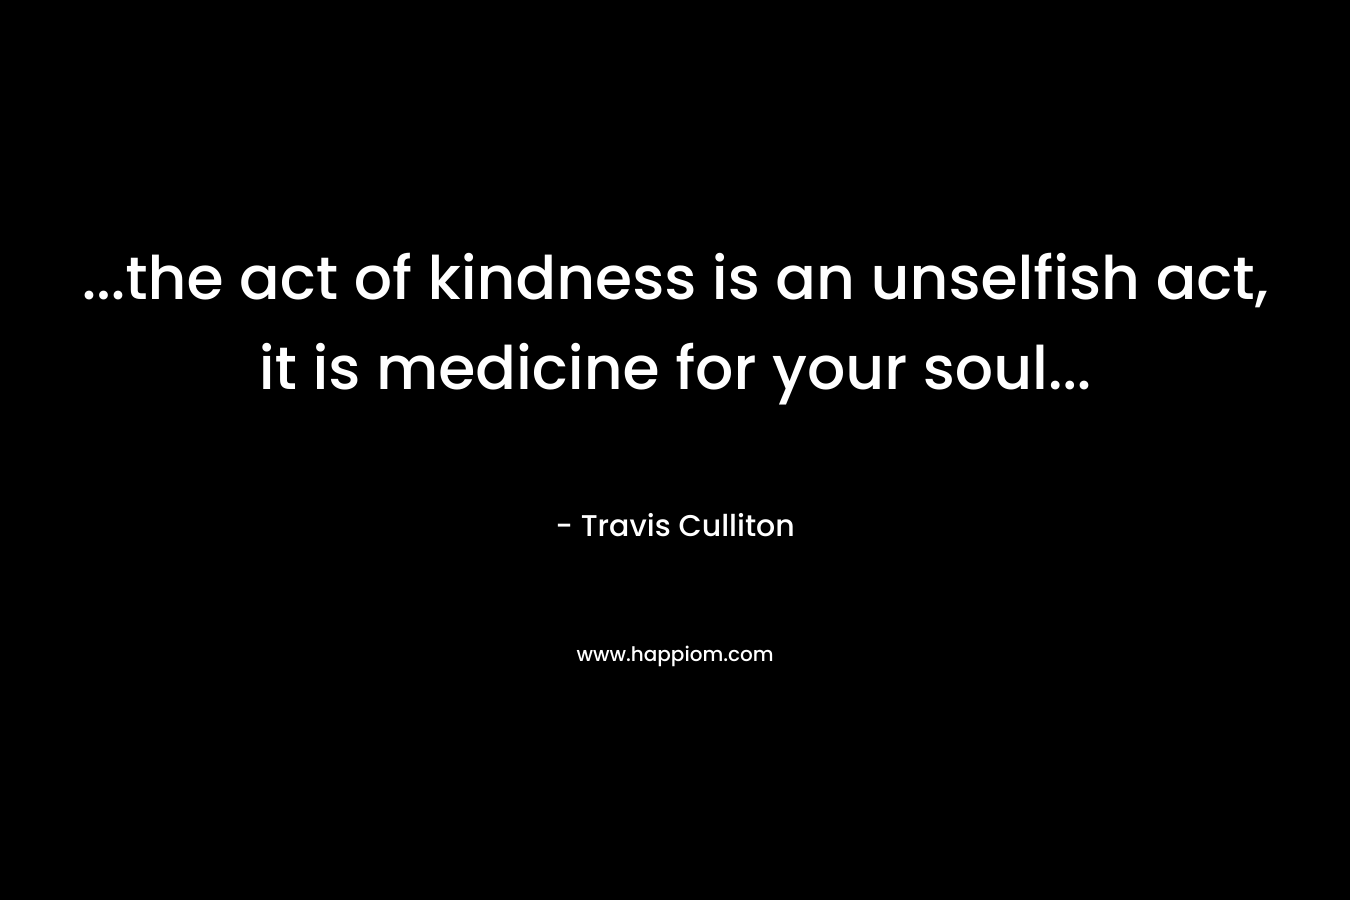 ...the act of kindness is an unselfish act, it is medicine for your soul...